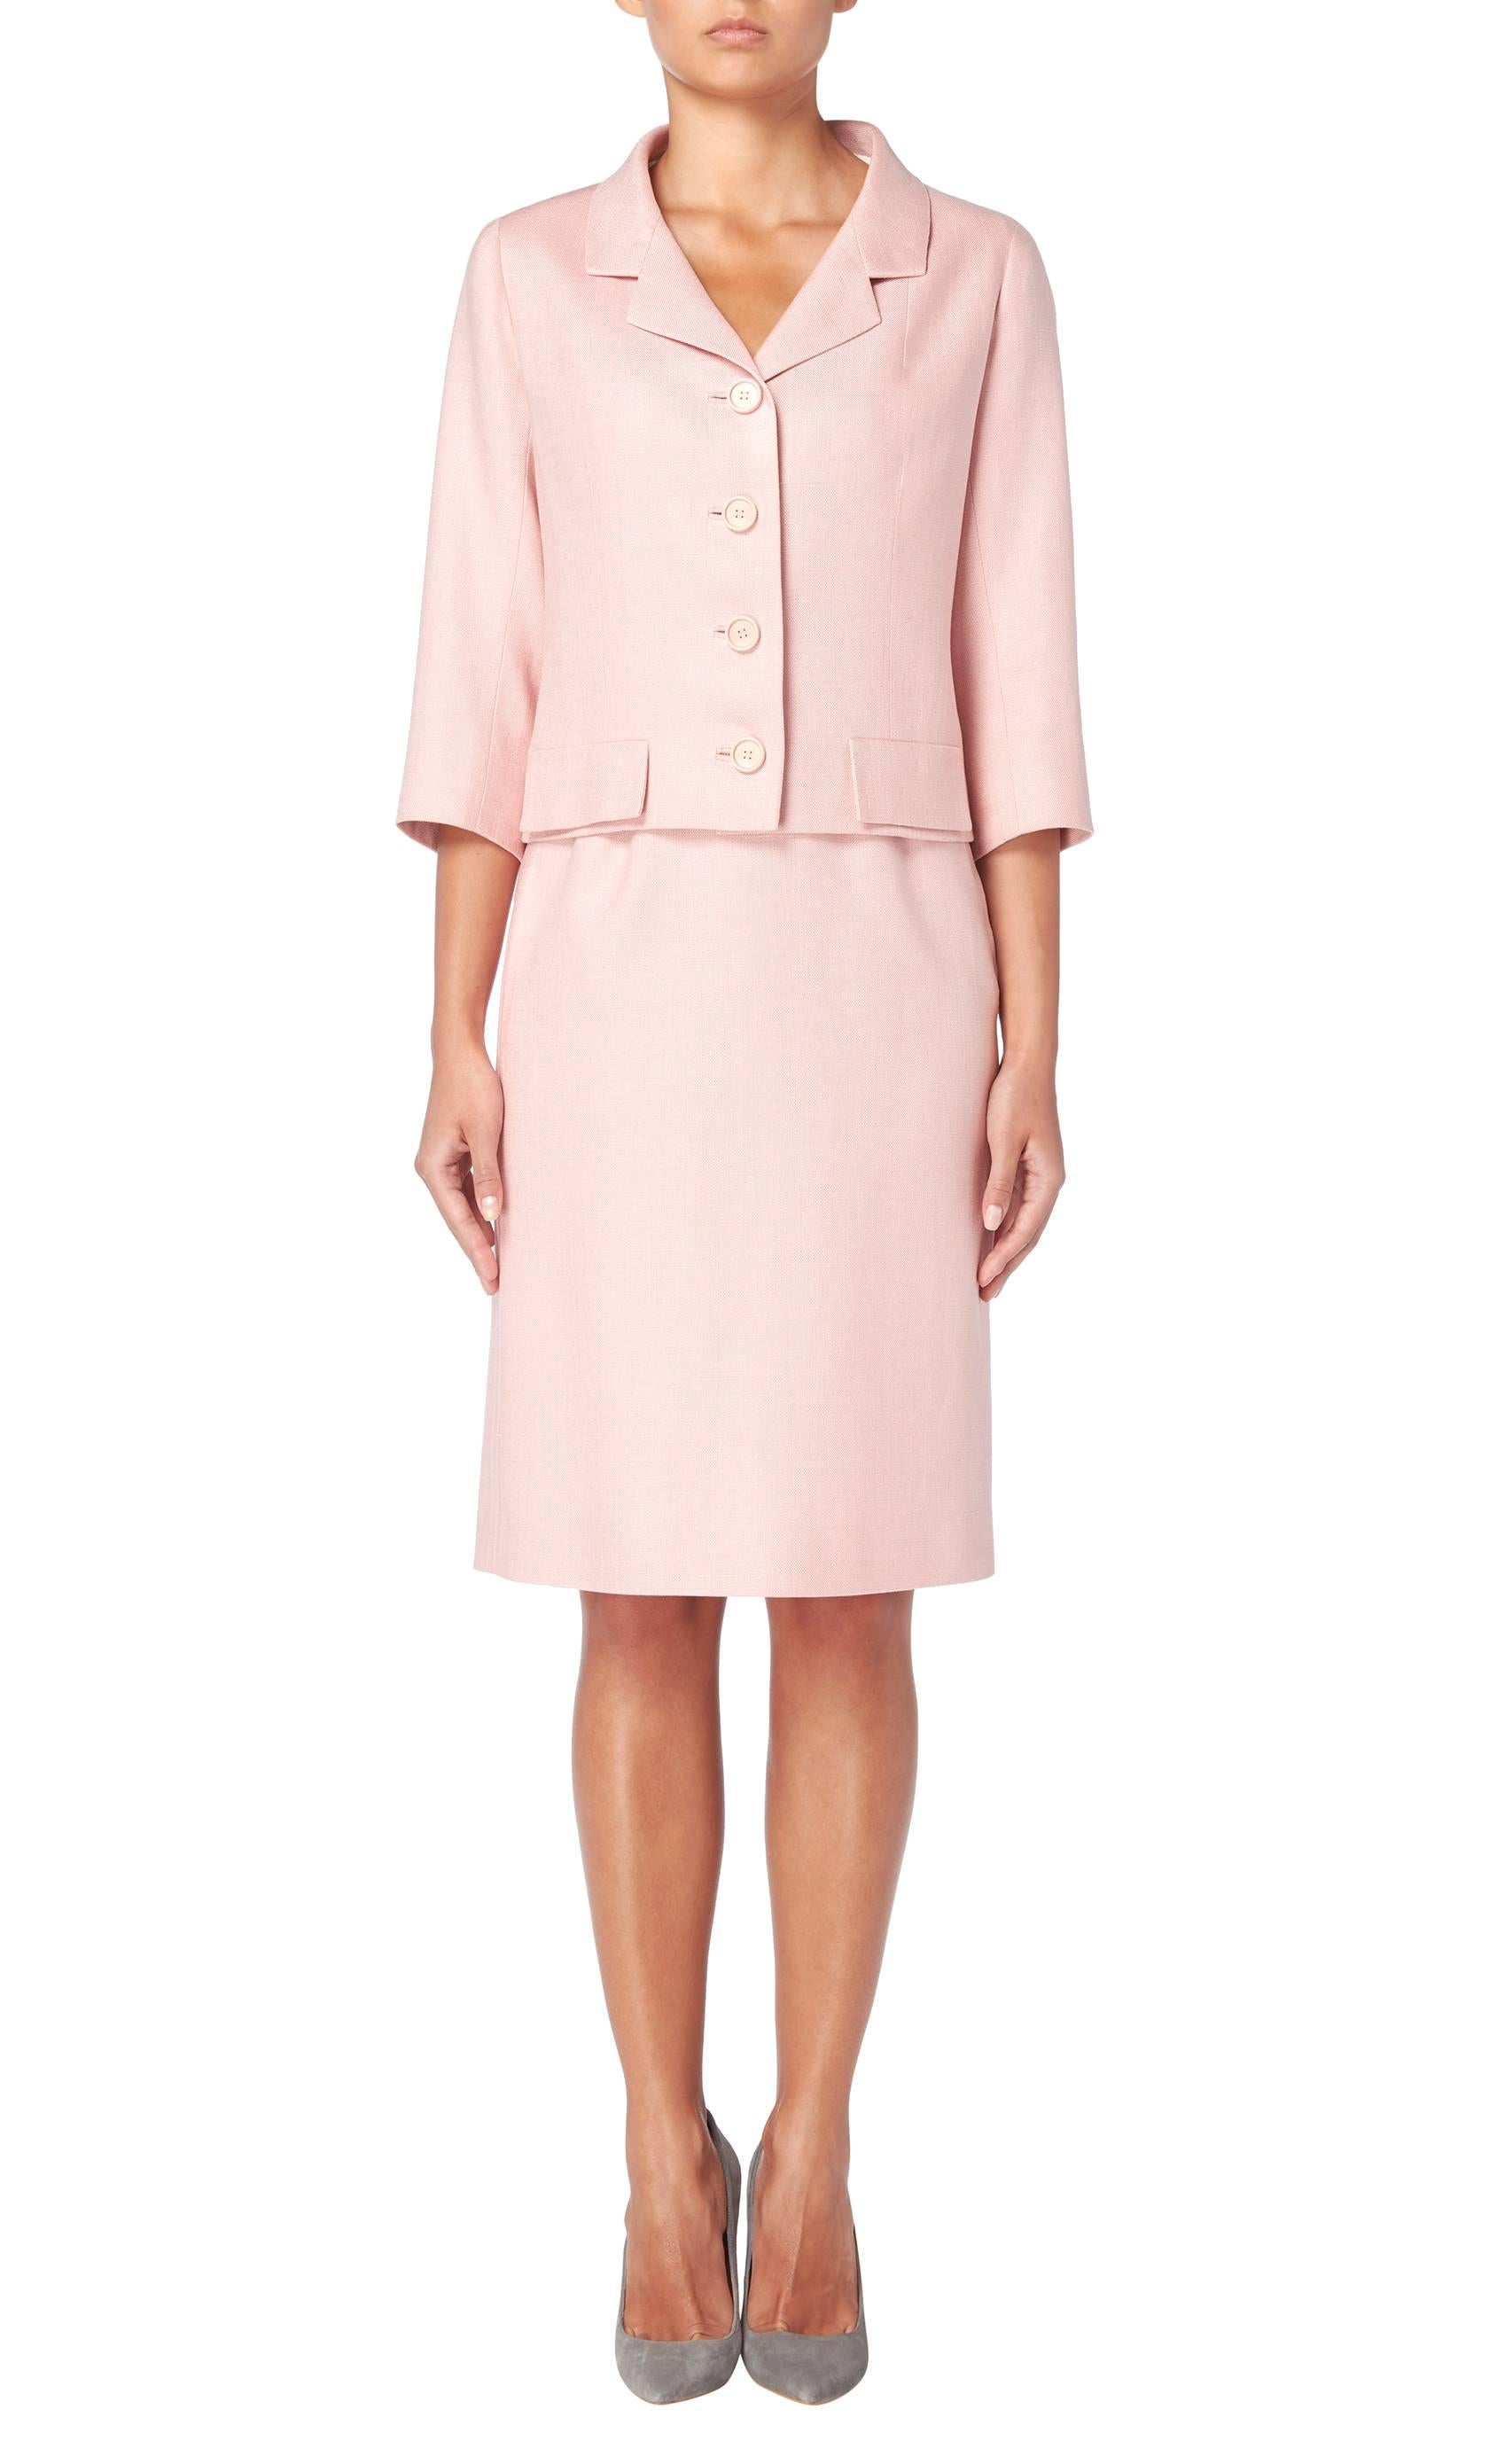 A fantastic example of how Cristobal Balenciaga’s tailoring remains incredibly contemporary, this skirt suit designed for his Eisa label will fit seamlessly into a modern wardrobe. Comprising of a jacket with three-quarter length sleeves and